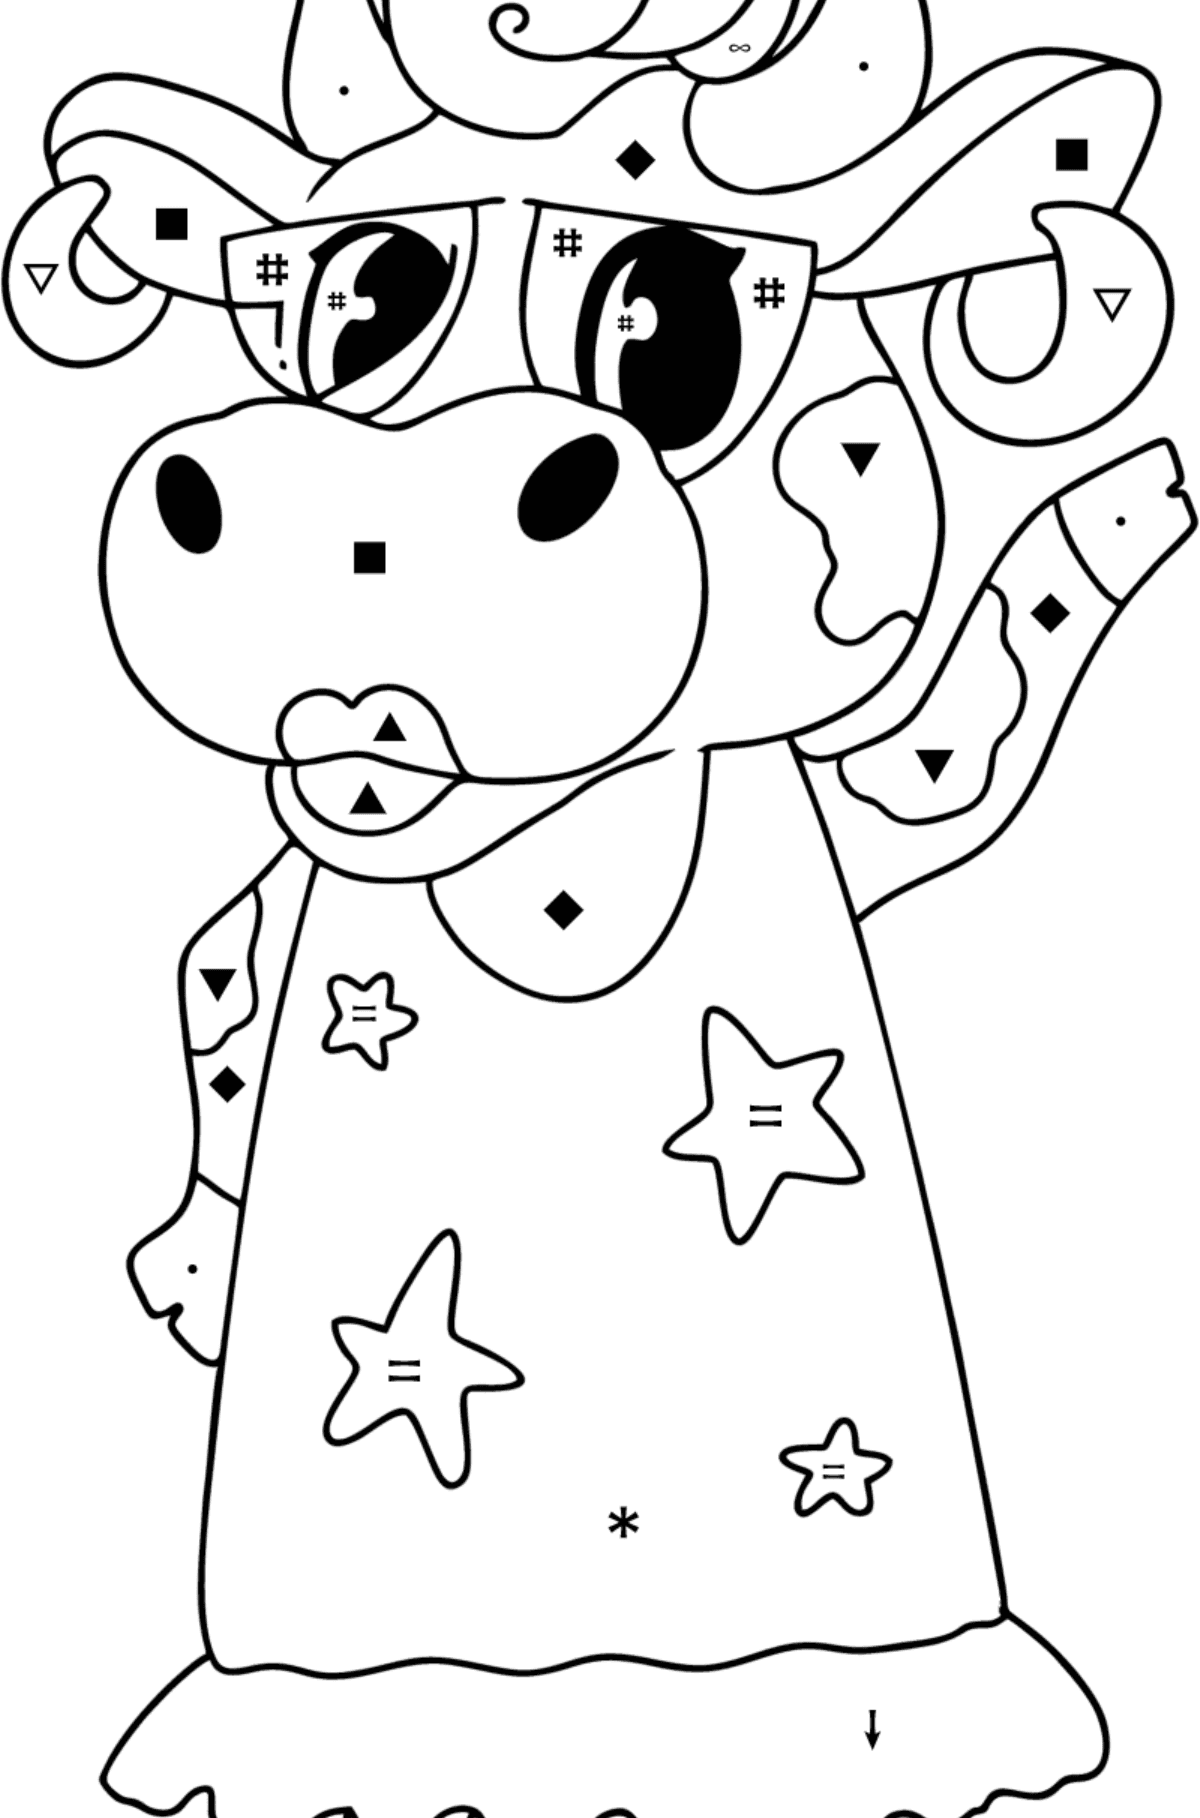 Cartoon cow standing up coloring page - Coloring by Symbols for Kids